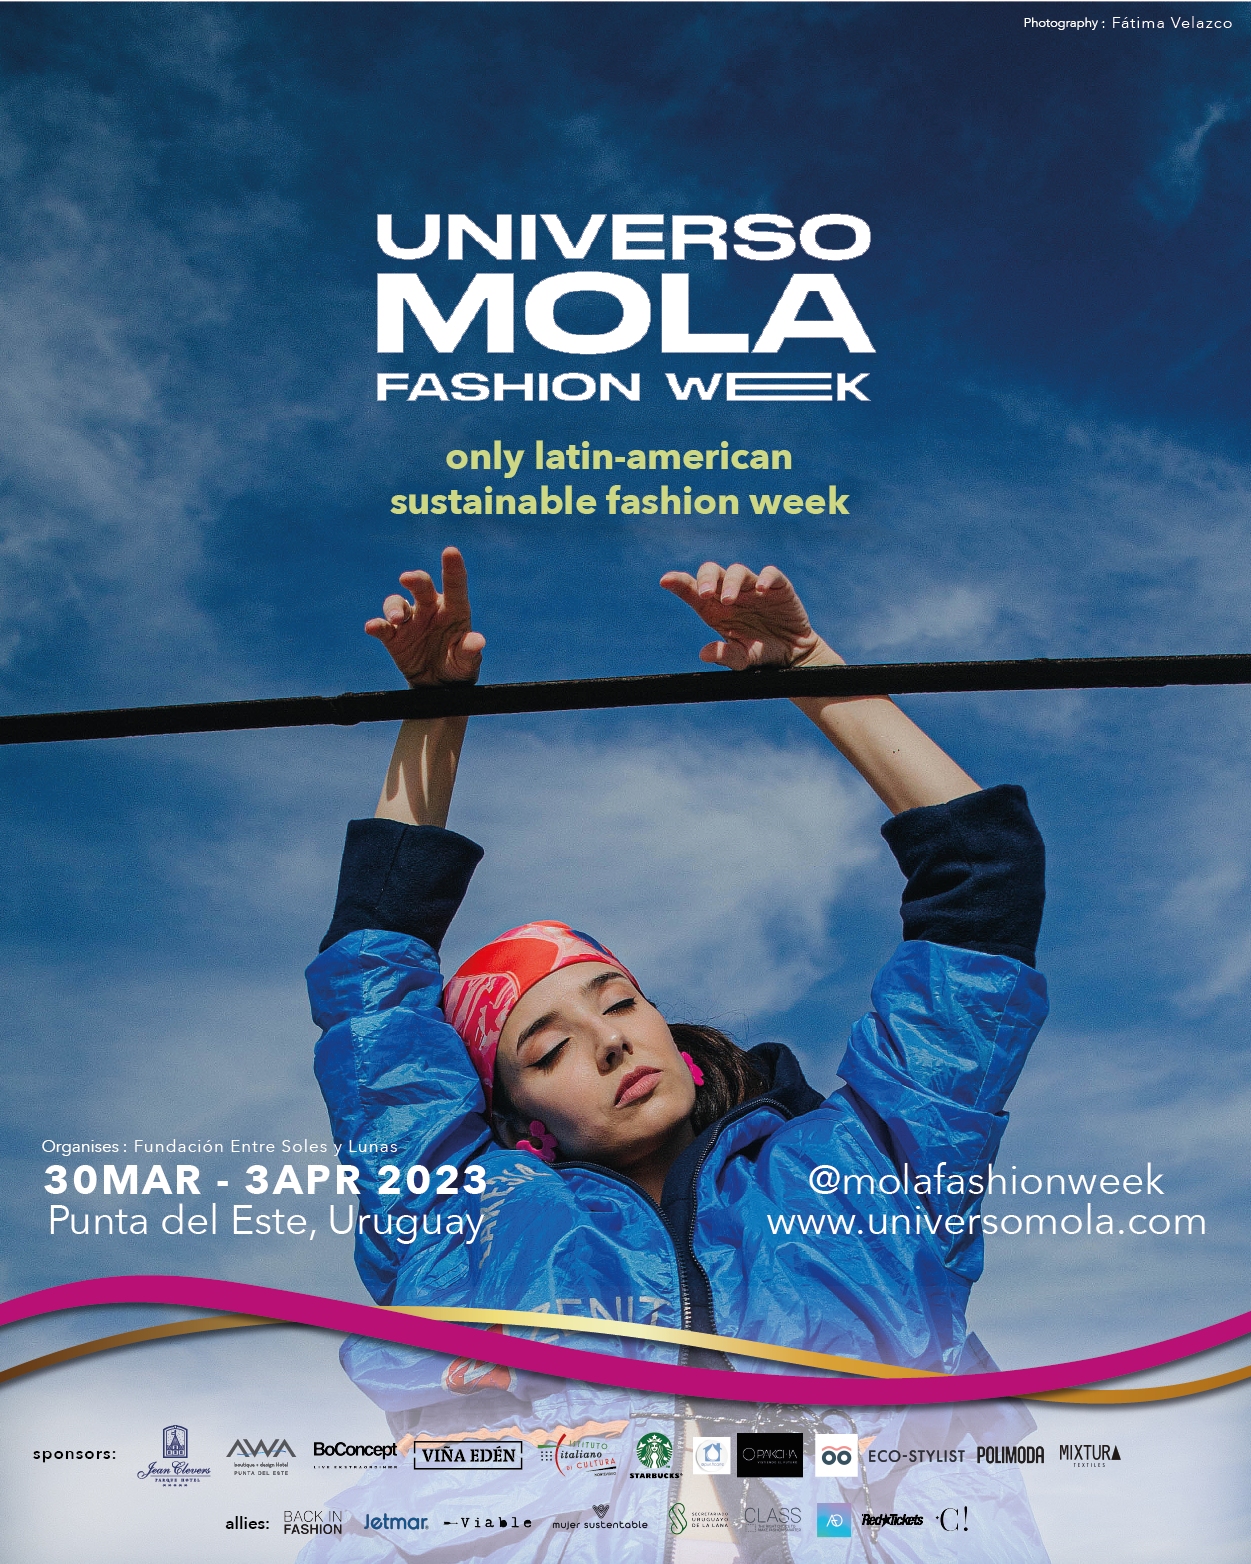 C.L.A.S.S. JOINS UNIVERSO MOLA FASHION WEEK 2023 SECOND EDITION IN PUNTA DEL ESTE FROM MARCH 30TH TO APRIL 3RD
